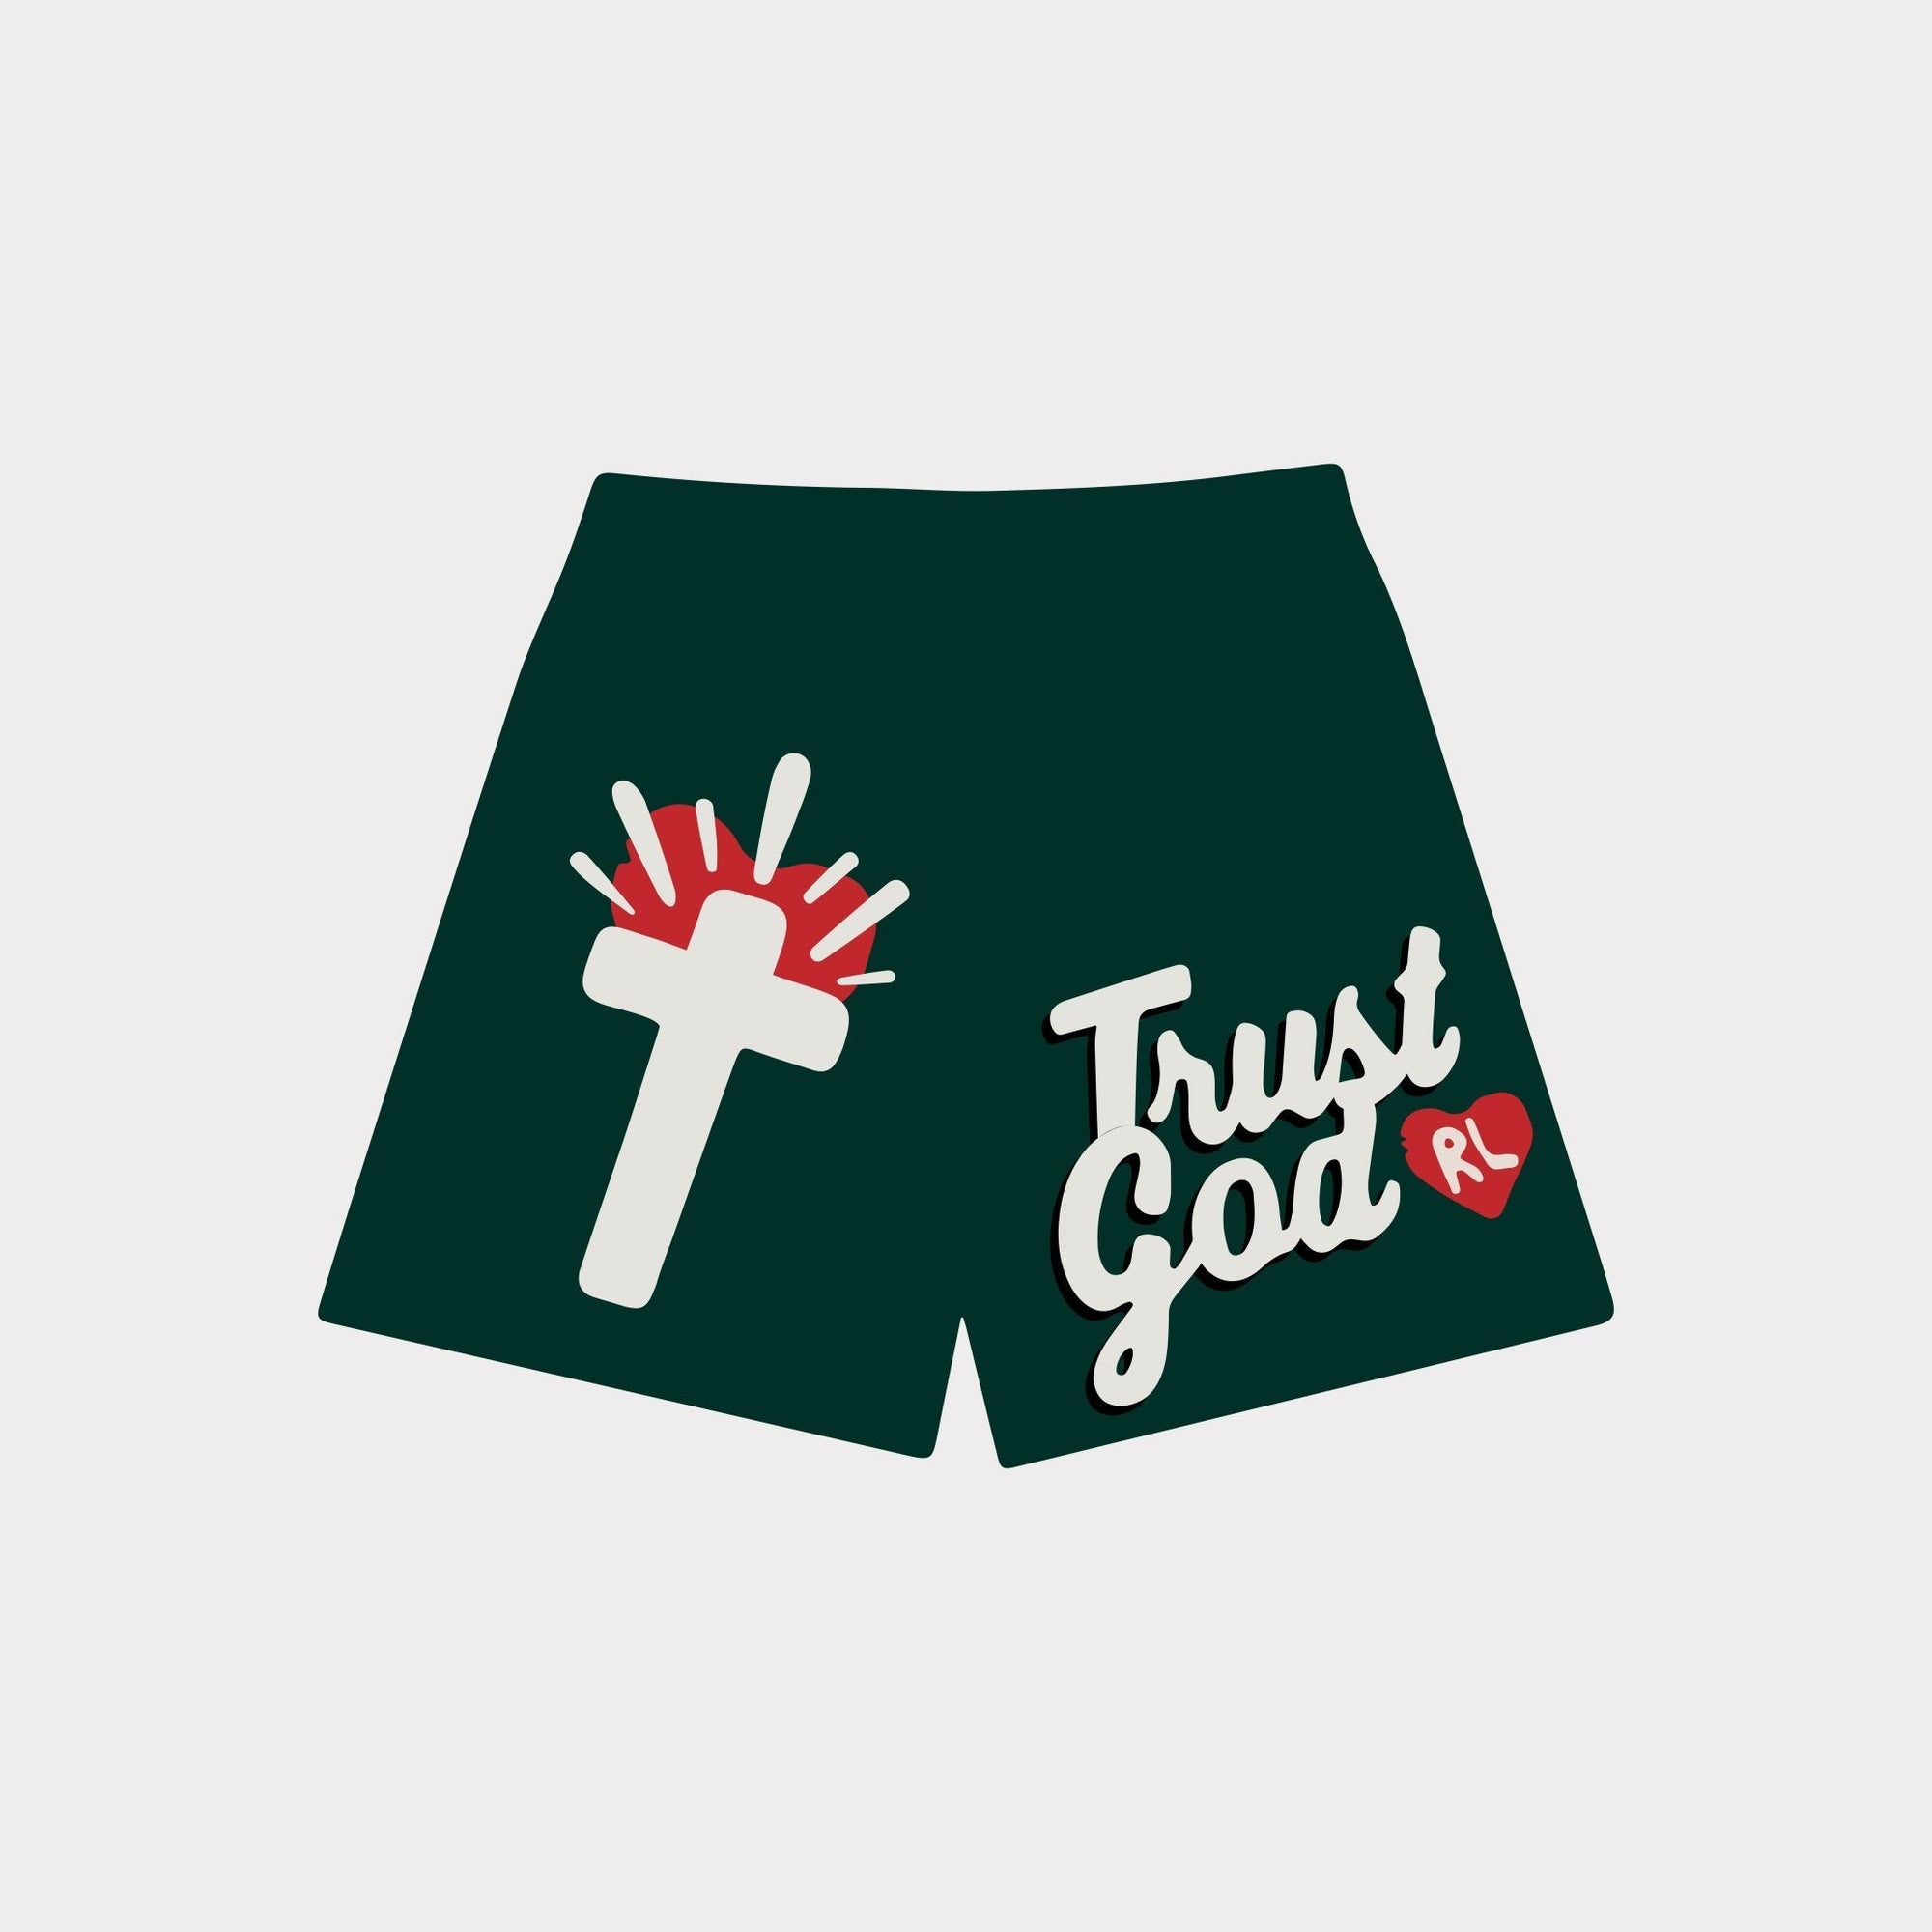 Trust God Mesh Shorts - Forest - RED LETTERS